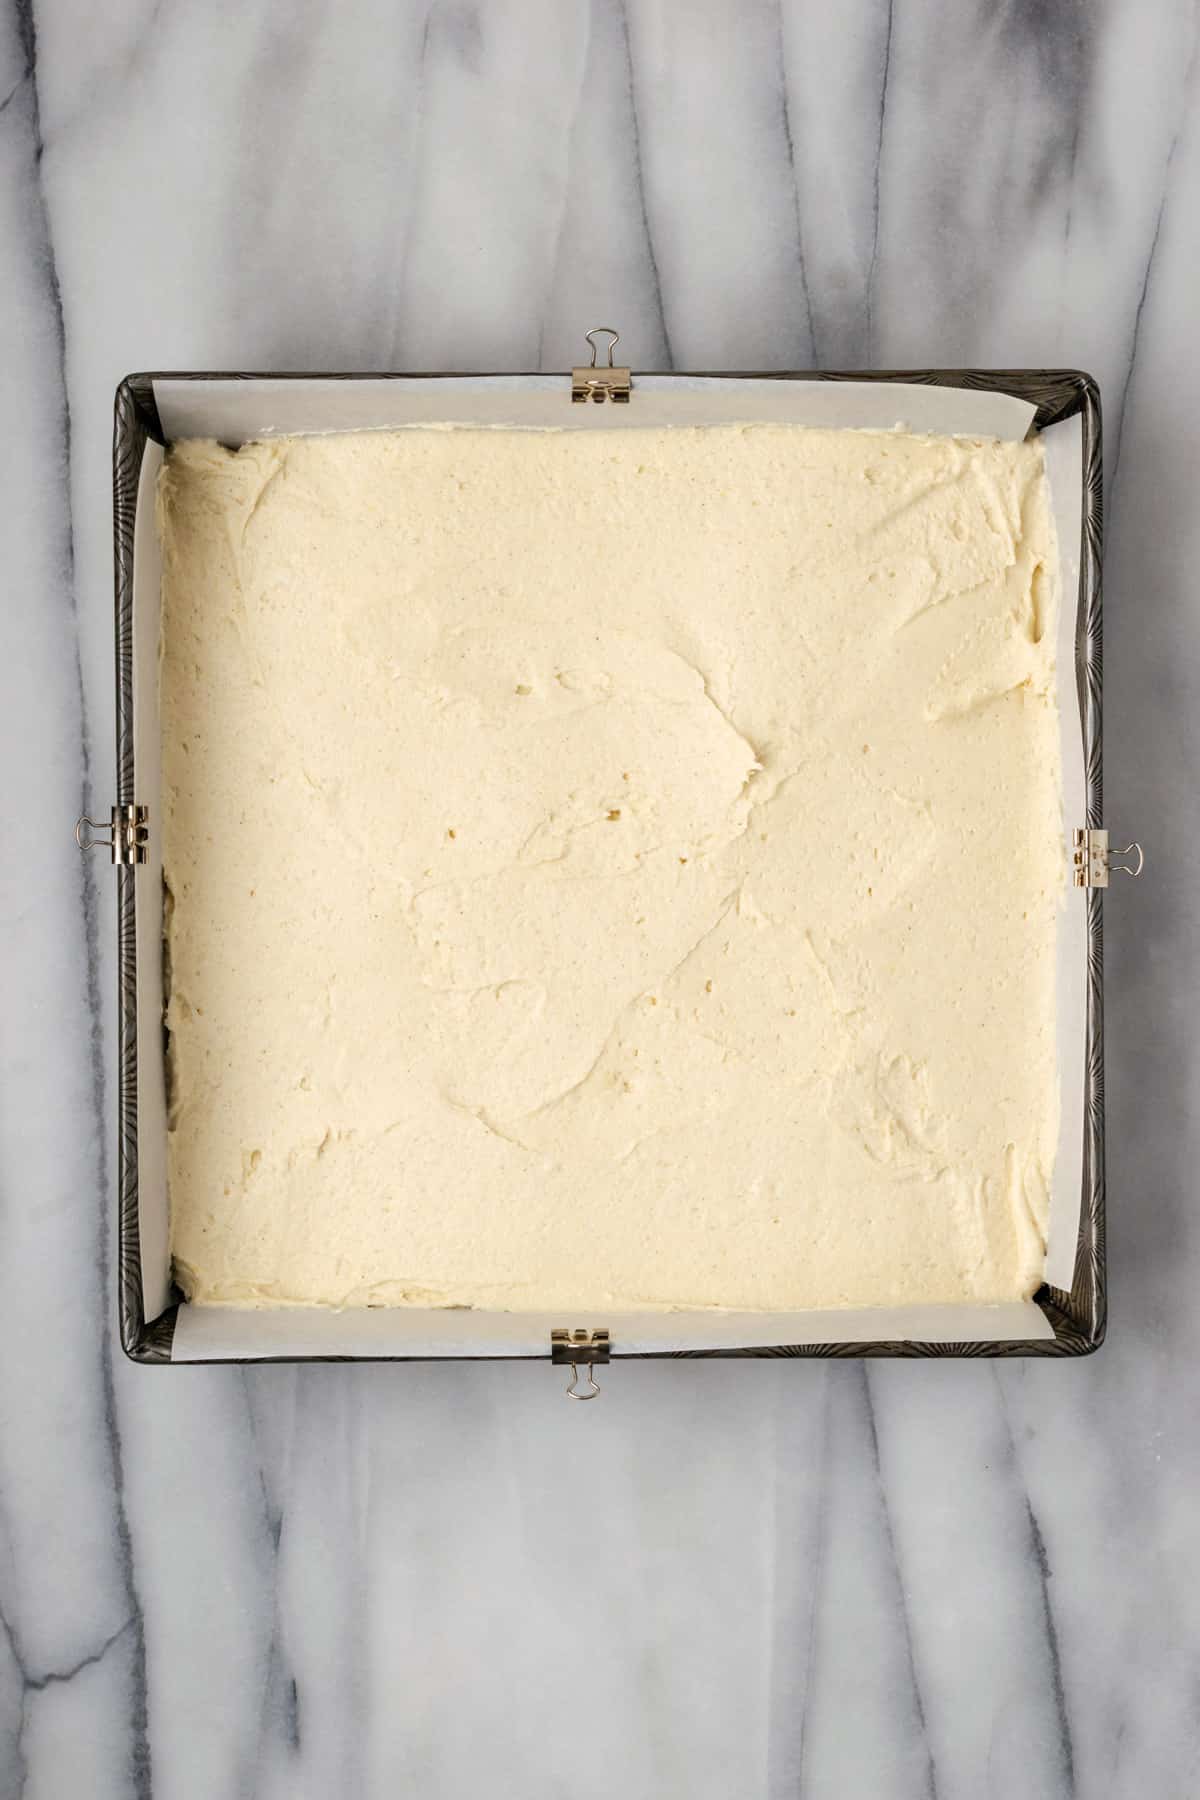 Crumb cake batter spread into a square baking pan.